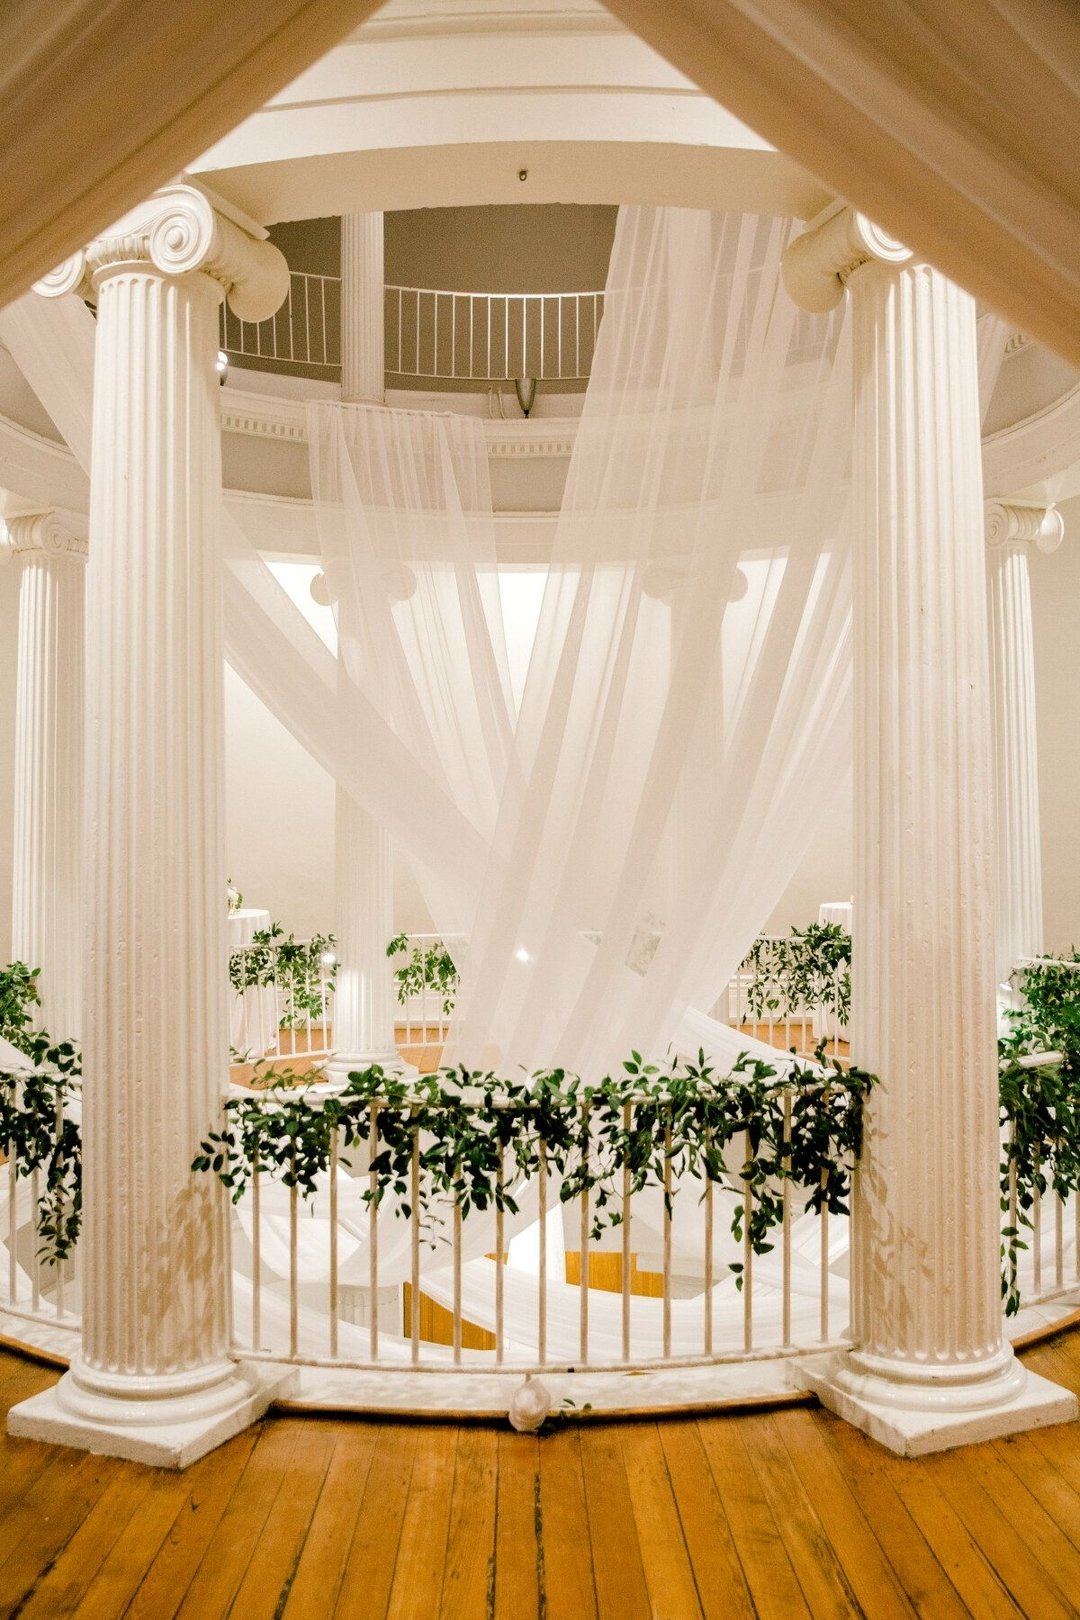 What&rsquo;s more whimsical and dreamy than floating drapes in the rotunda? 💭🌿🤍
.
.
.
#draping #rotunda #rotundadraping #whimsicaldraping #hibernianhall #hibernianhallwedding #hibernianwedding #pipeanddrape #whitefabricswag #whiteswag #whitedrapin